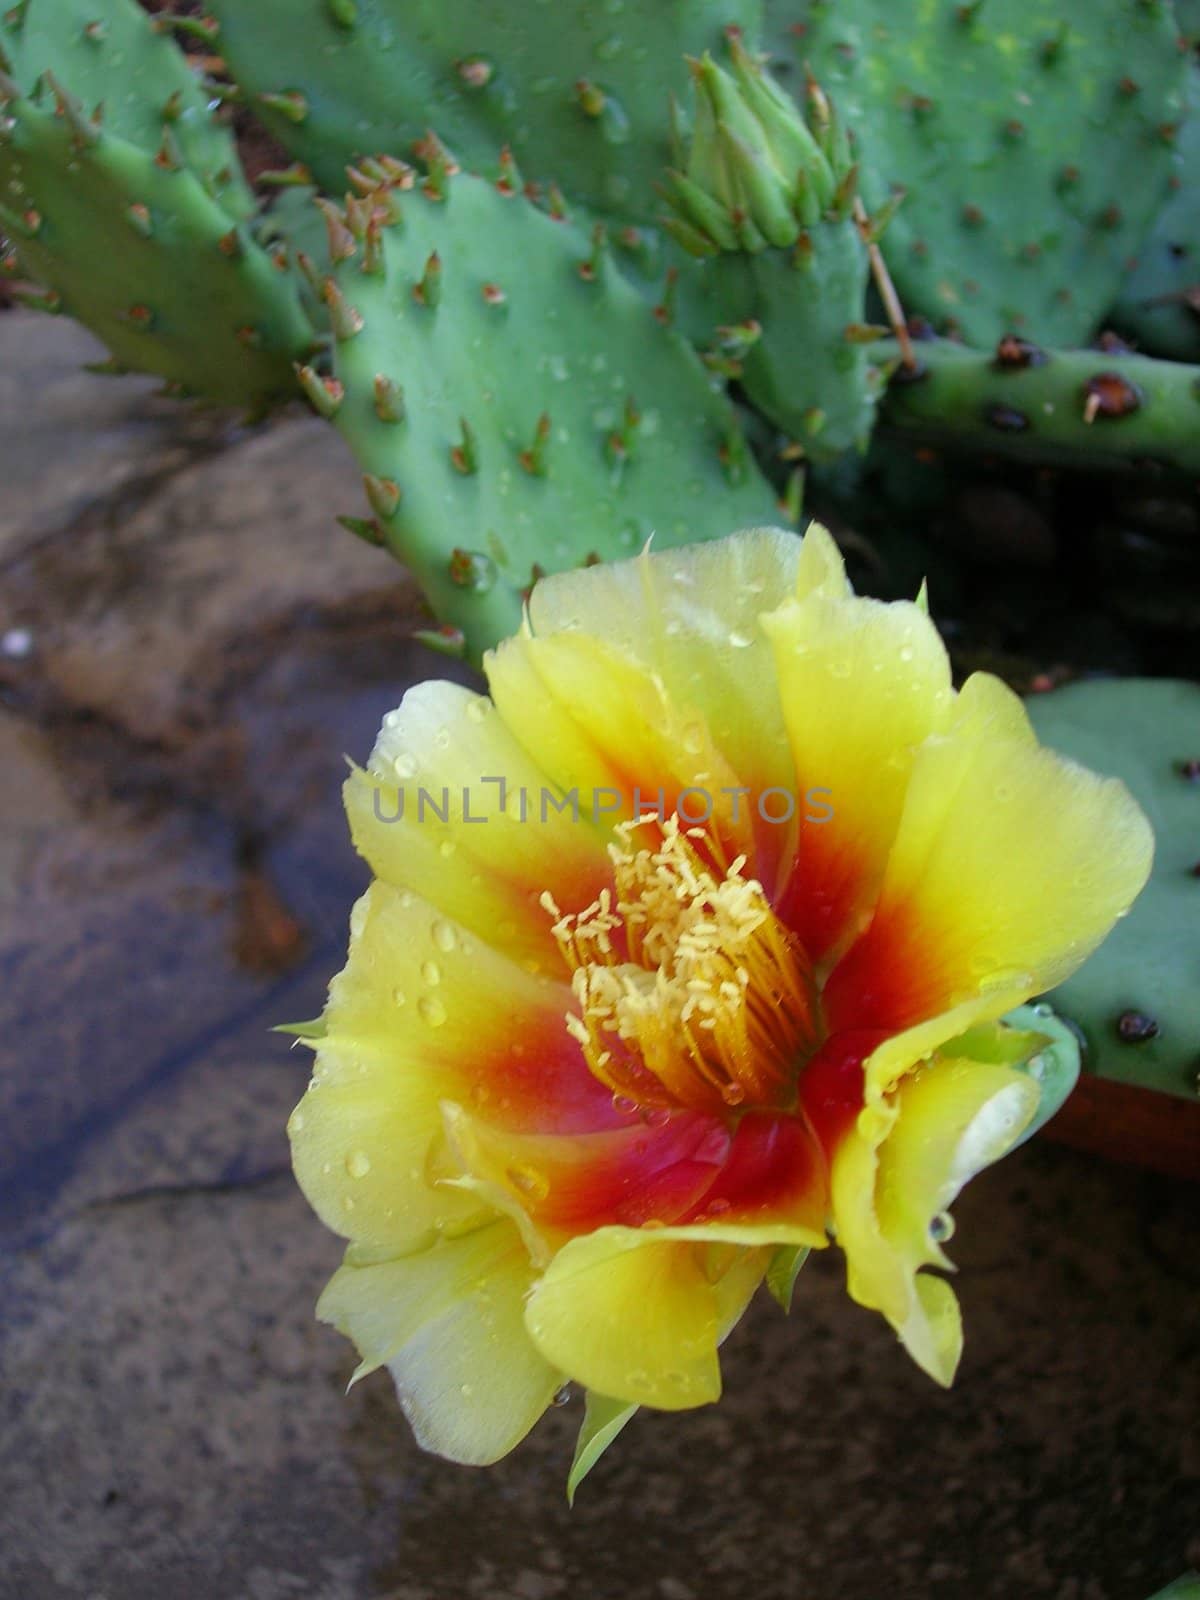 Yellow and red flower of a prickly pear cactus